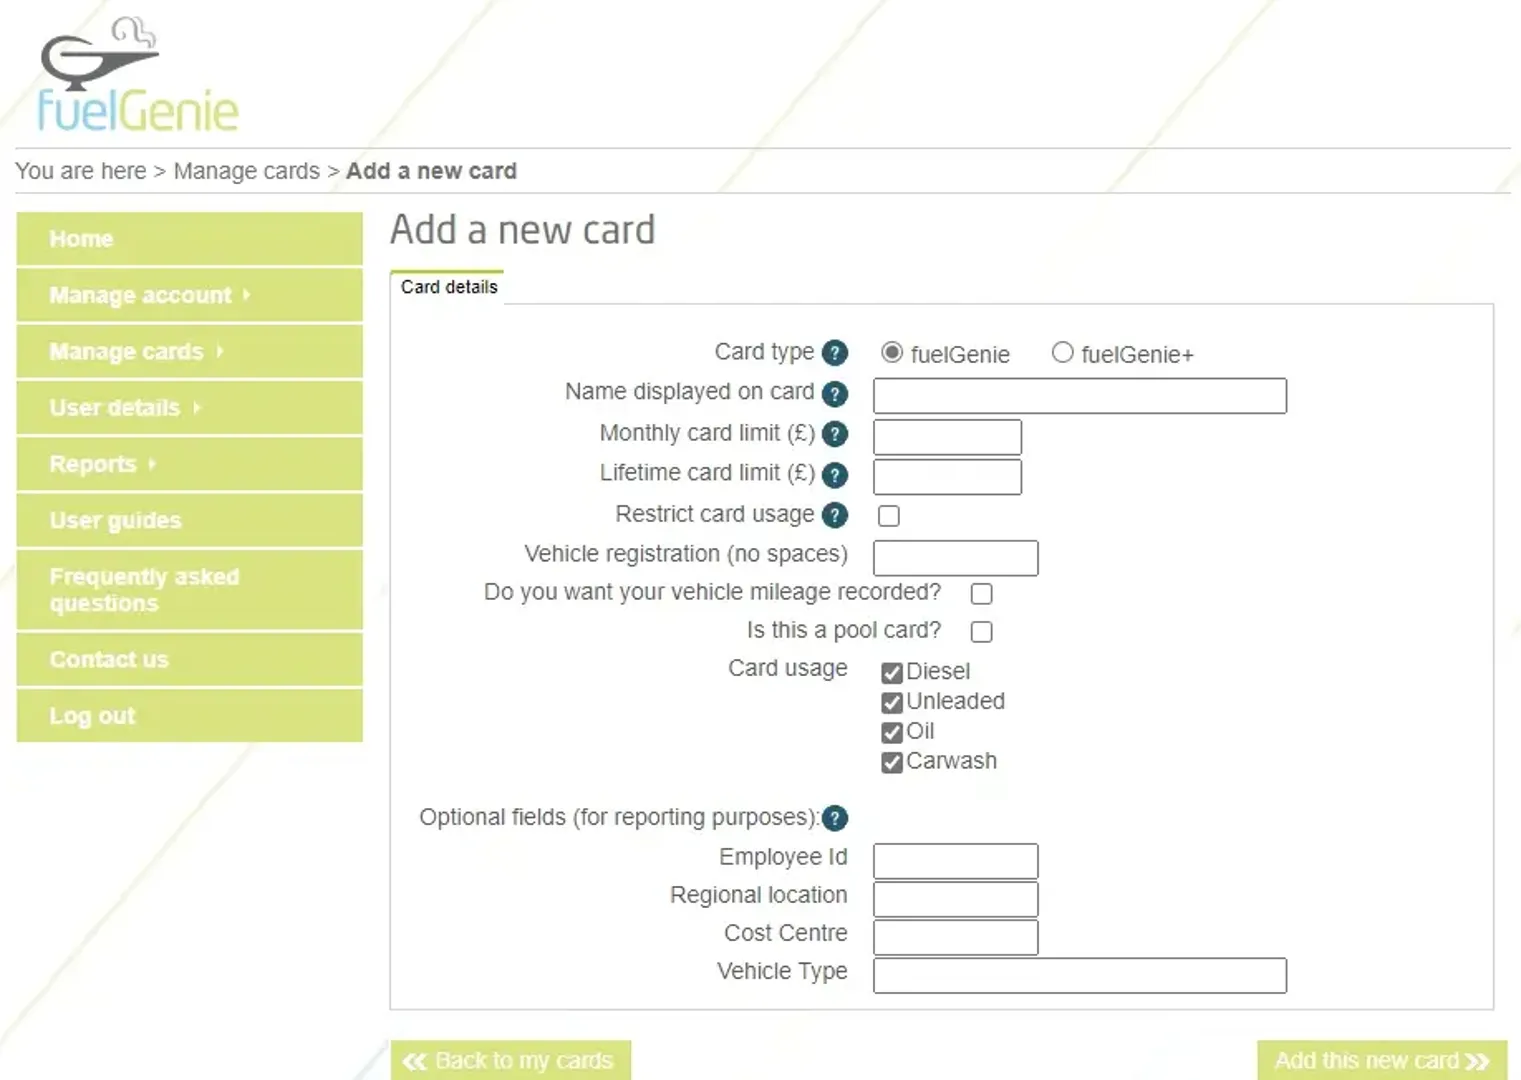 Dashboard view of 'Adding a new card' in the fuelGenie account